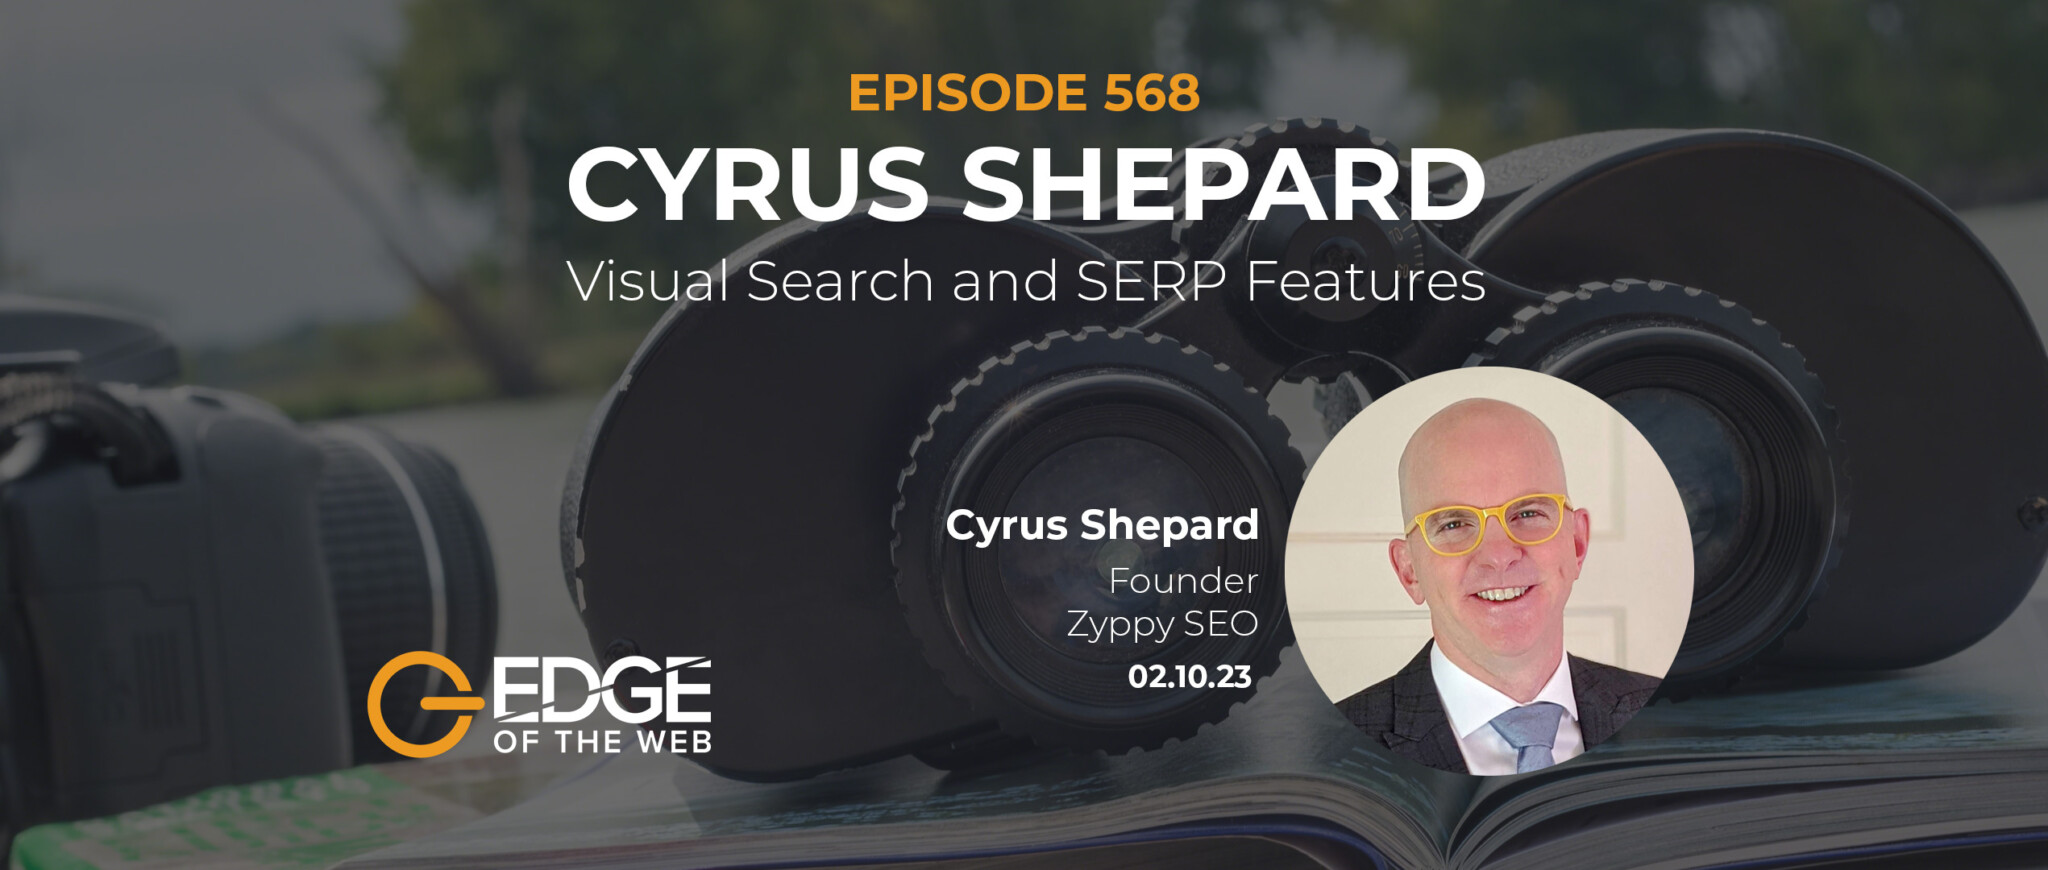 Cyrus Shepard EDGE Episode 568 Featured Image